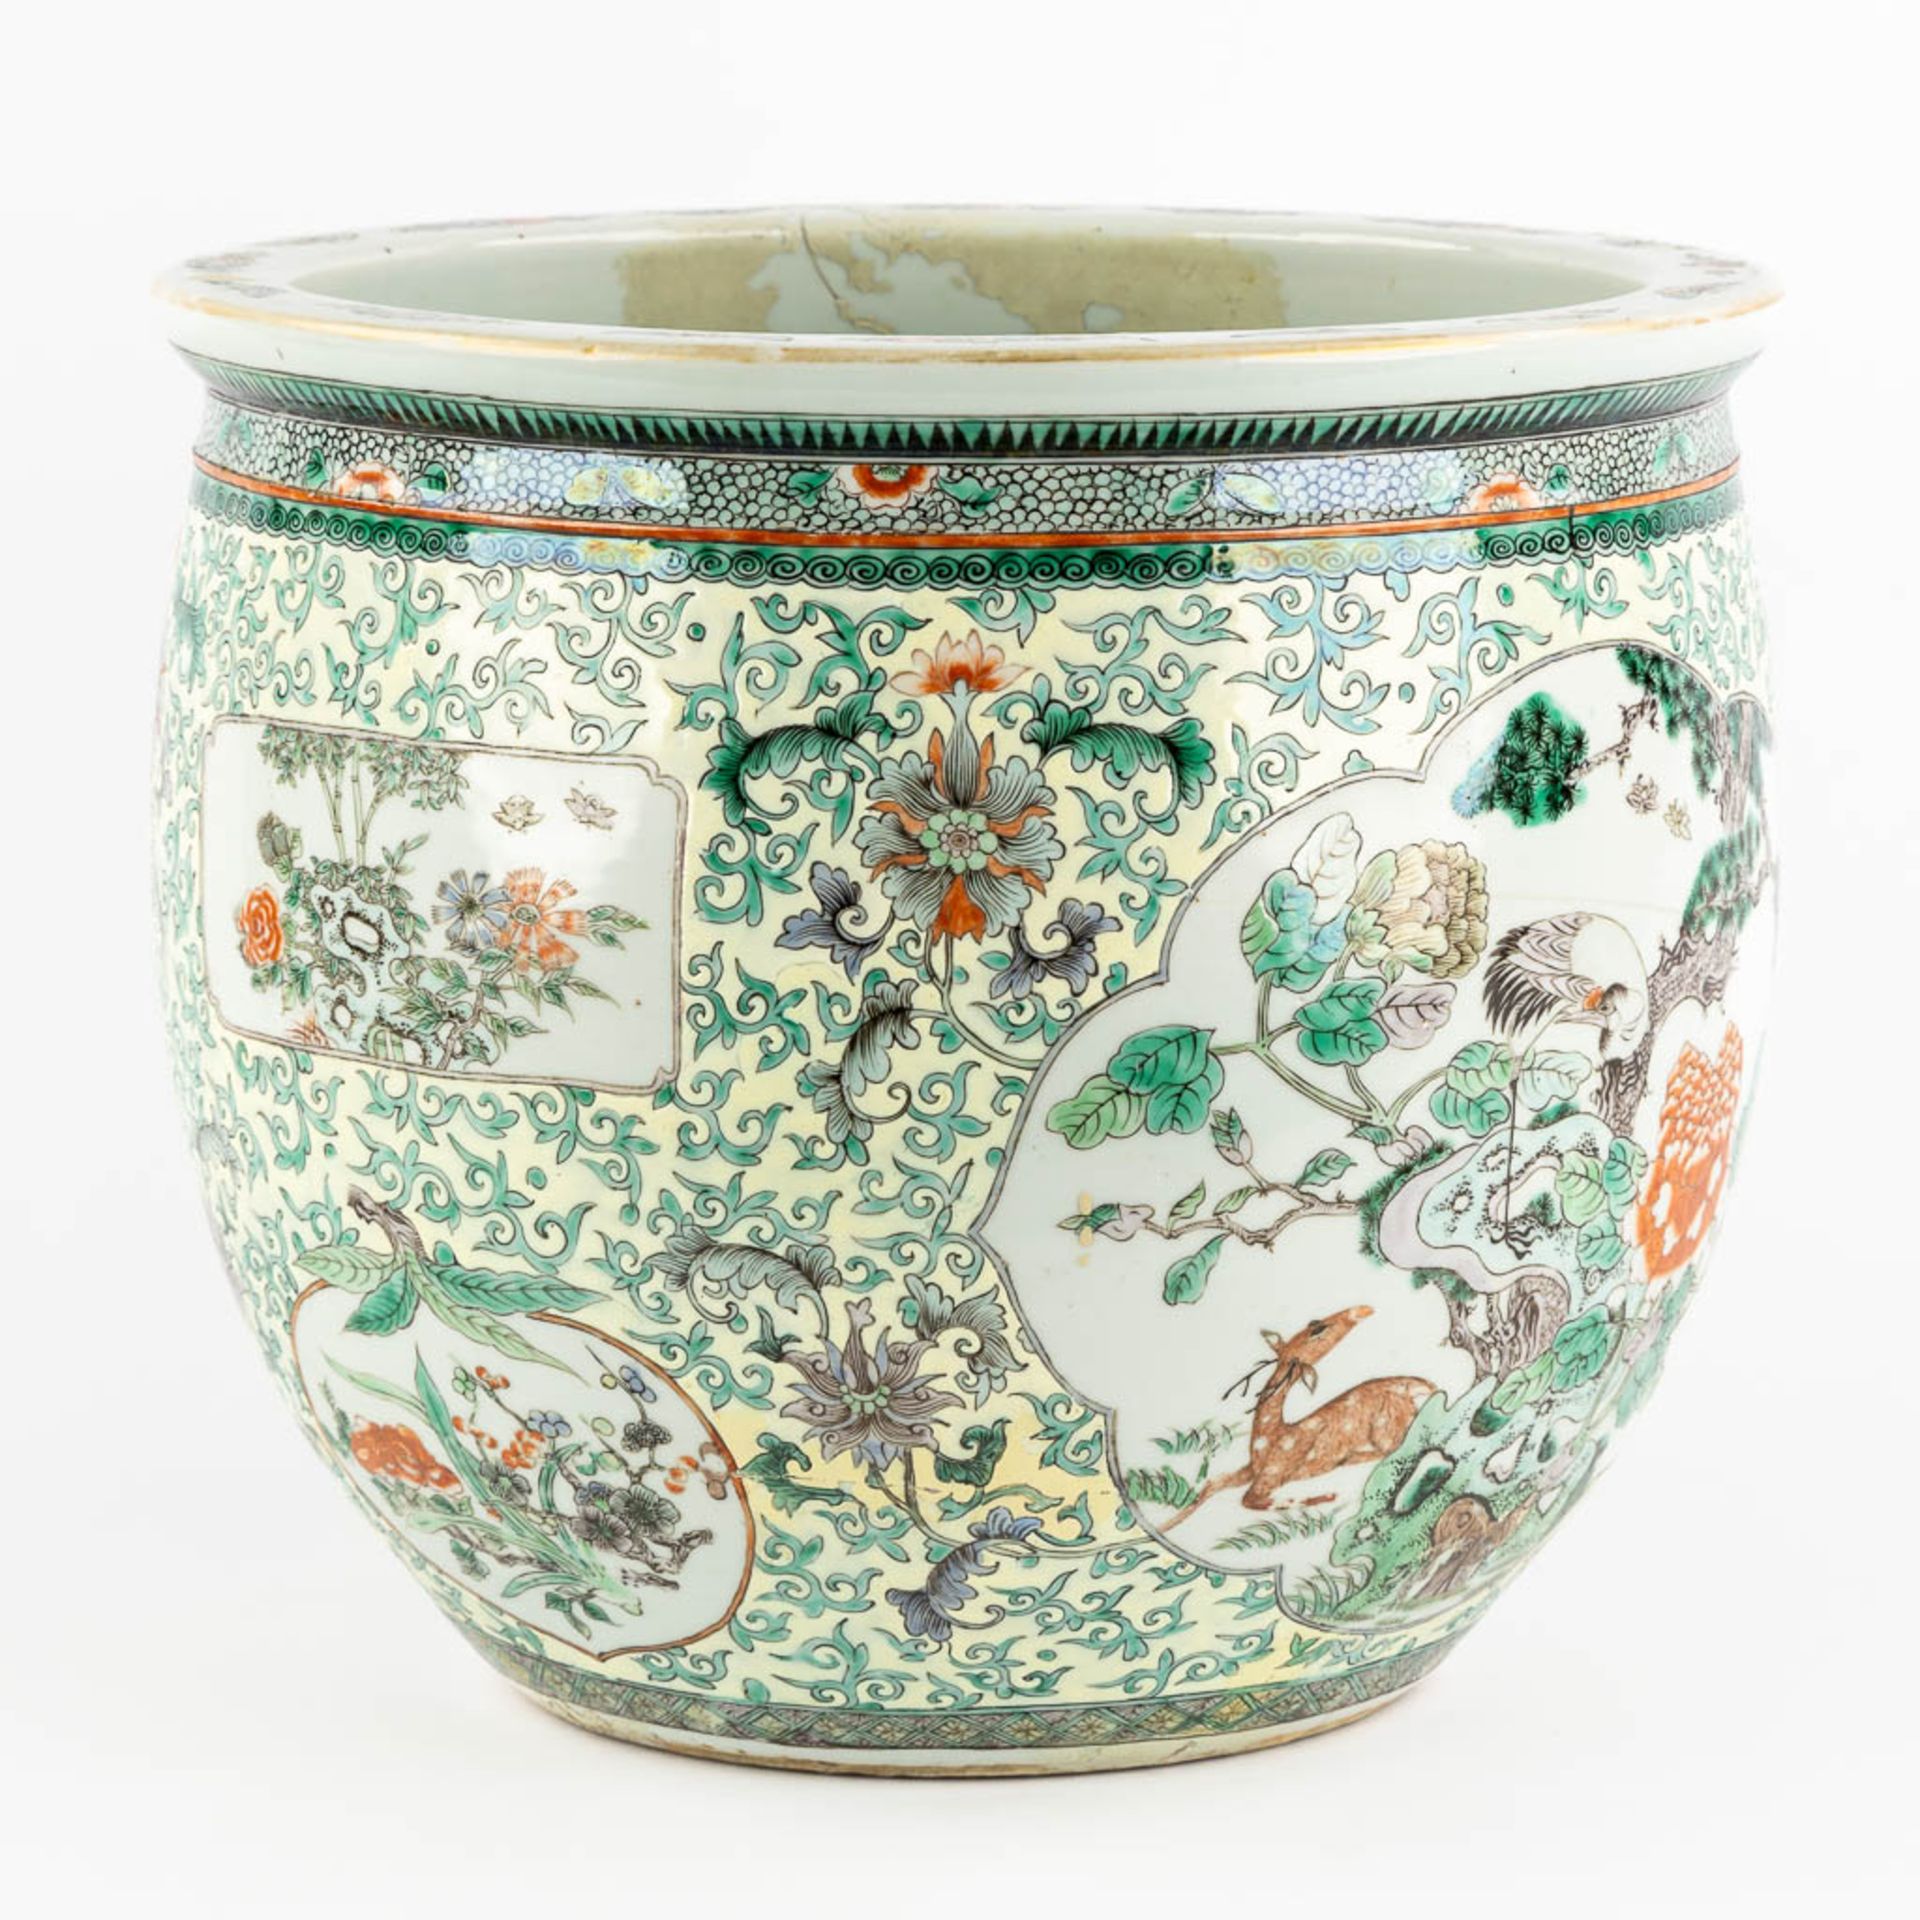 A Large Chinese Cache-Pot, Famille Verte decorated with fauna and flora. 19th C. (H:35 x D:40 cm) - Image 5 of 14